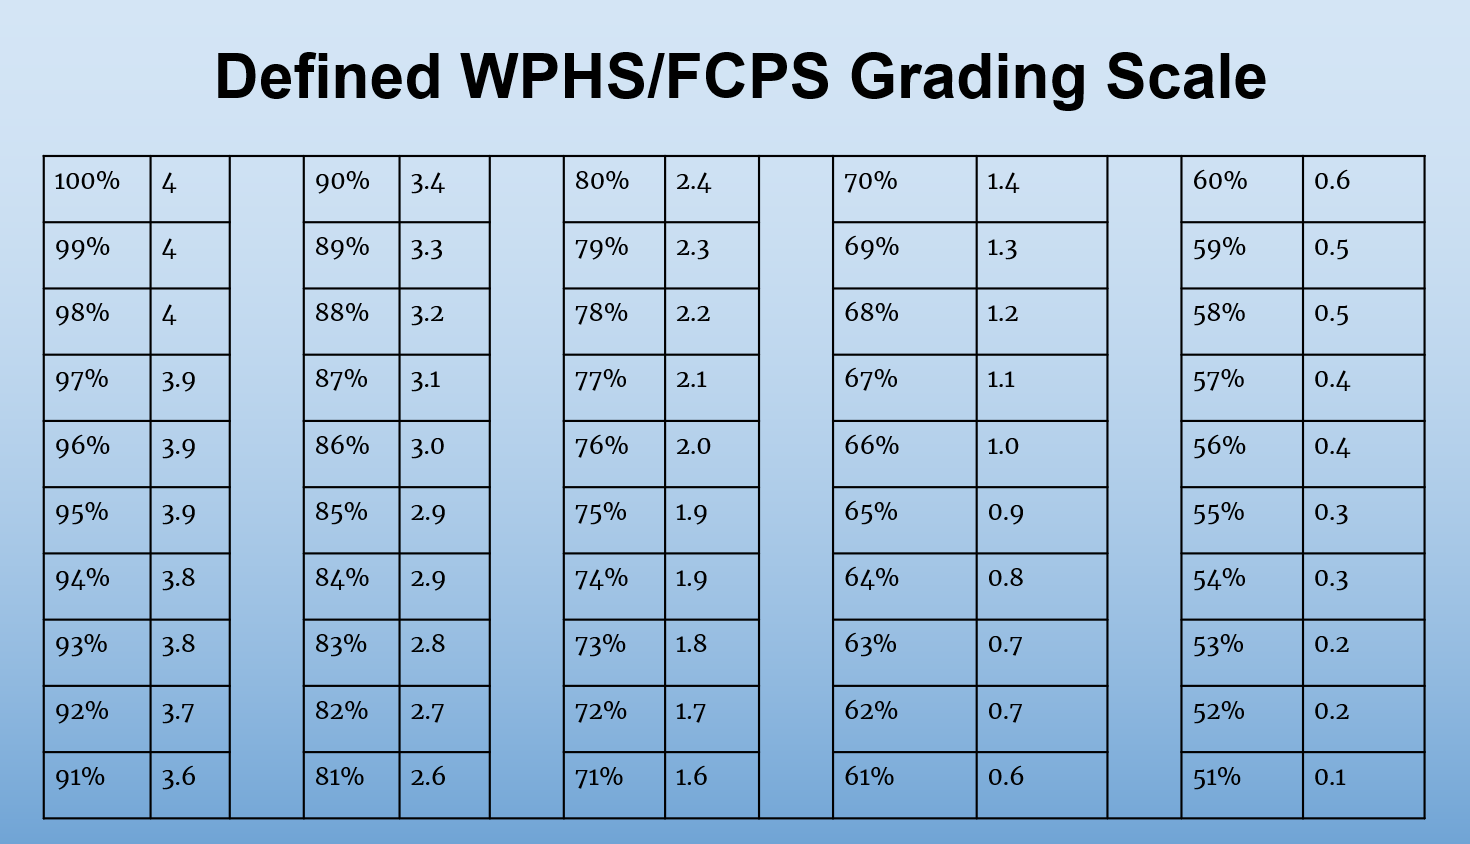 WPHS Grading Scale